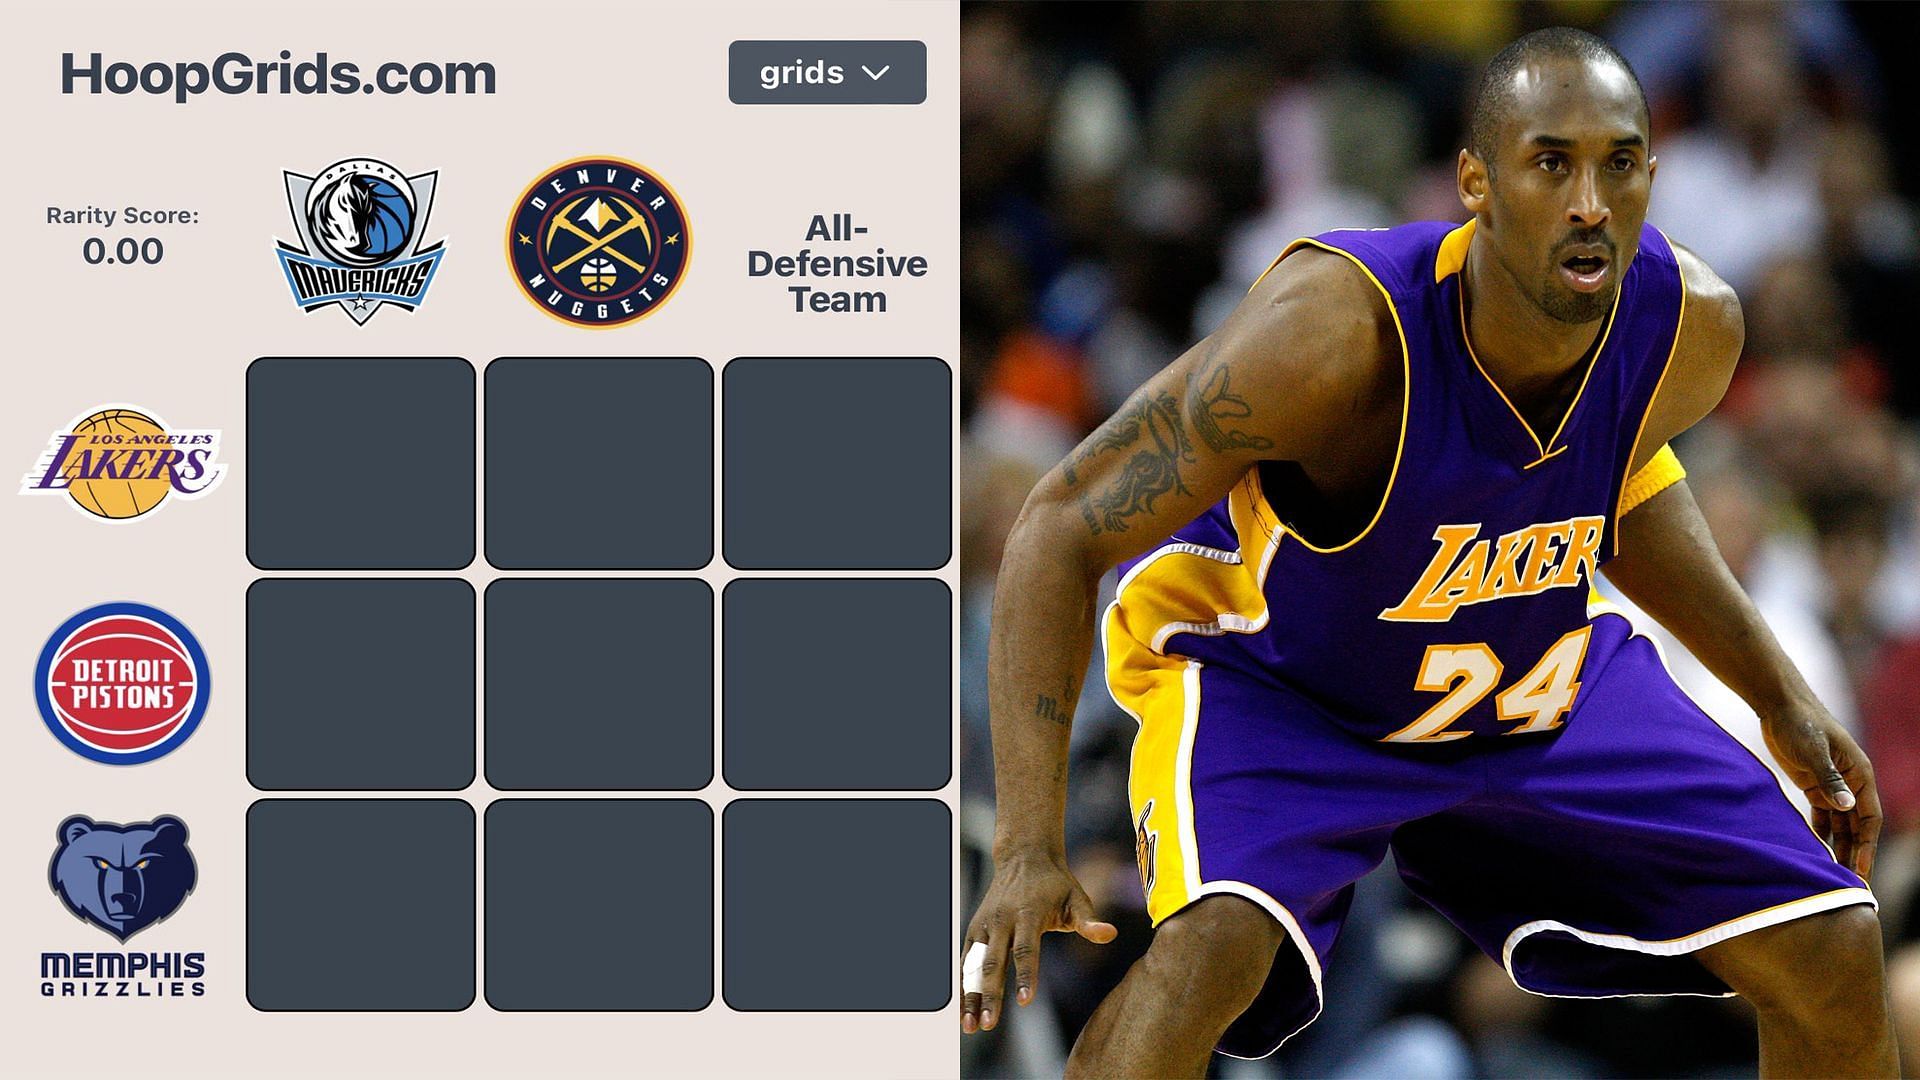 NBA Crossover Grid for July 17 featuring Kobe Bryant